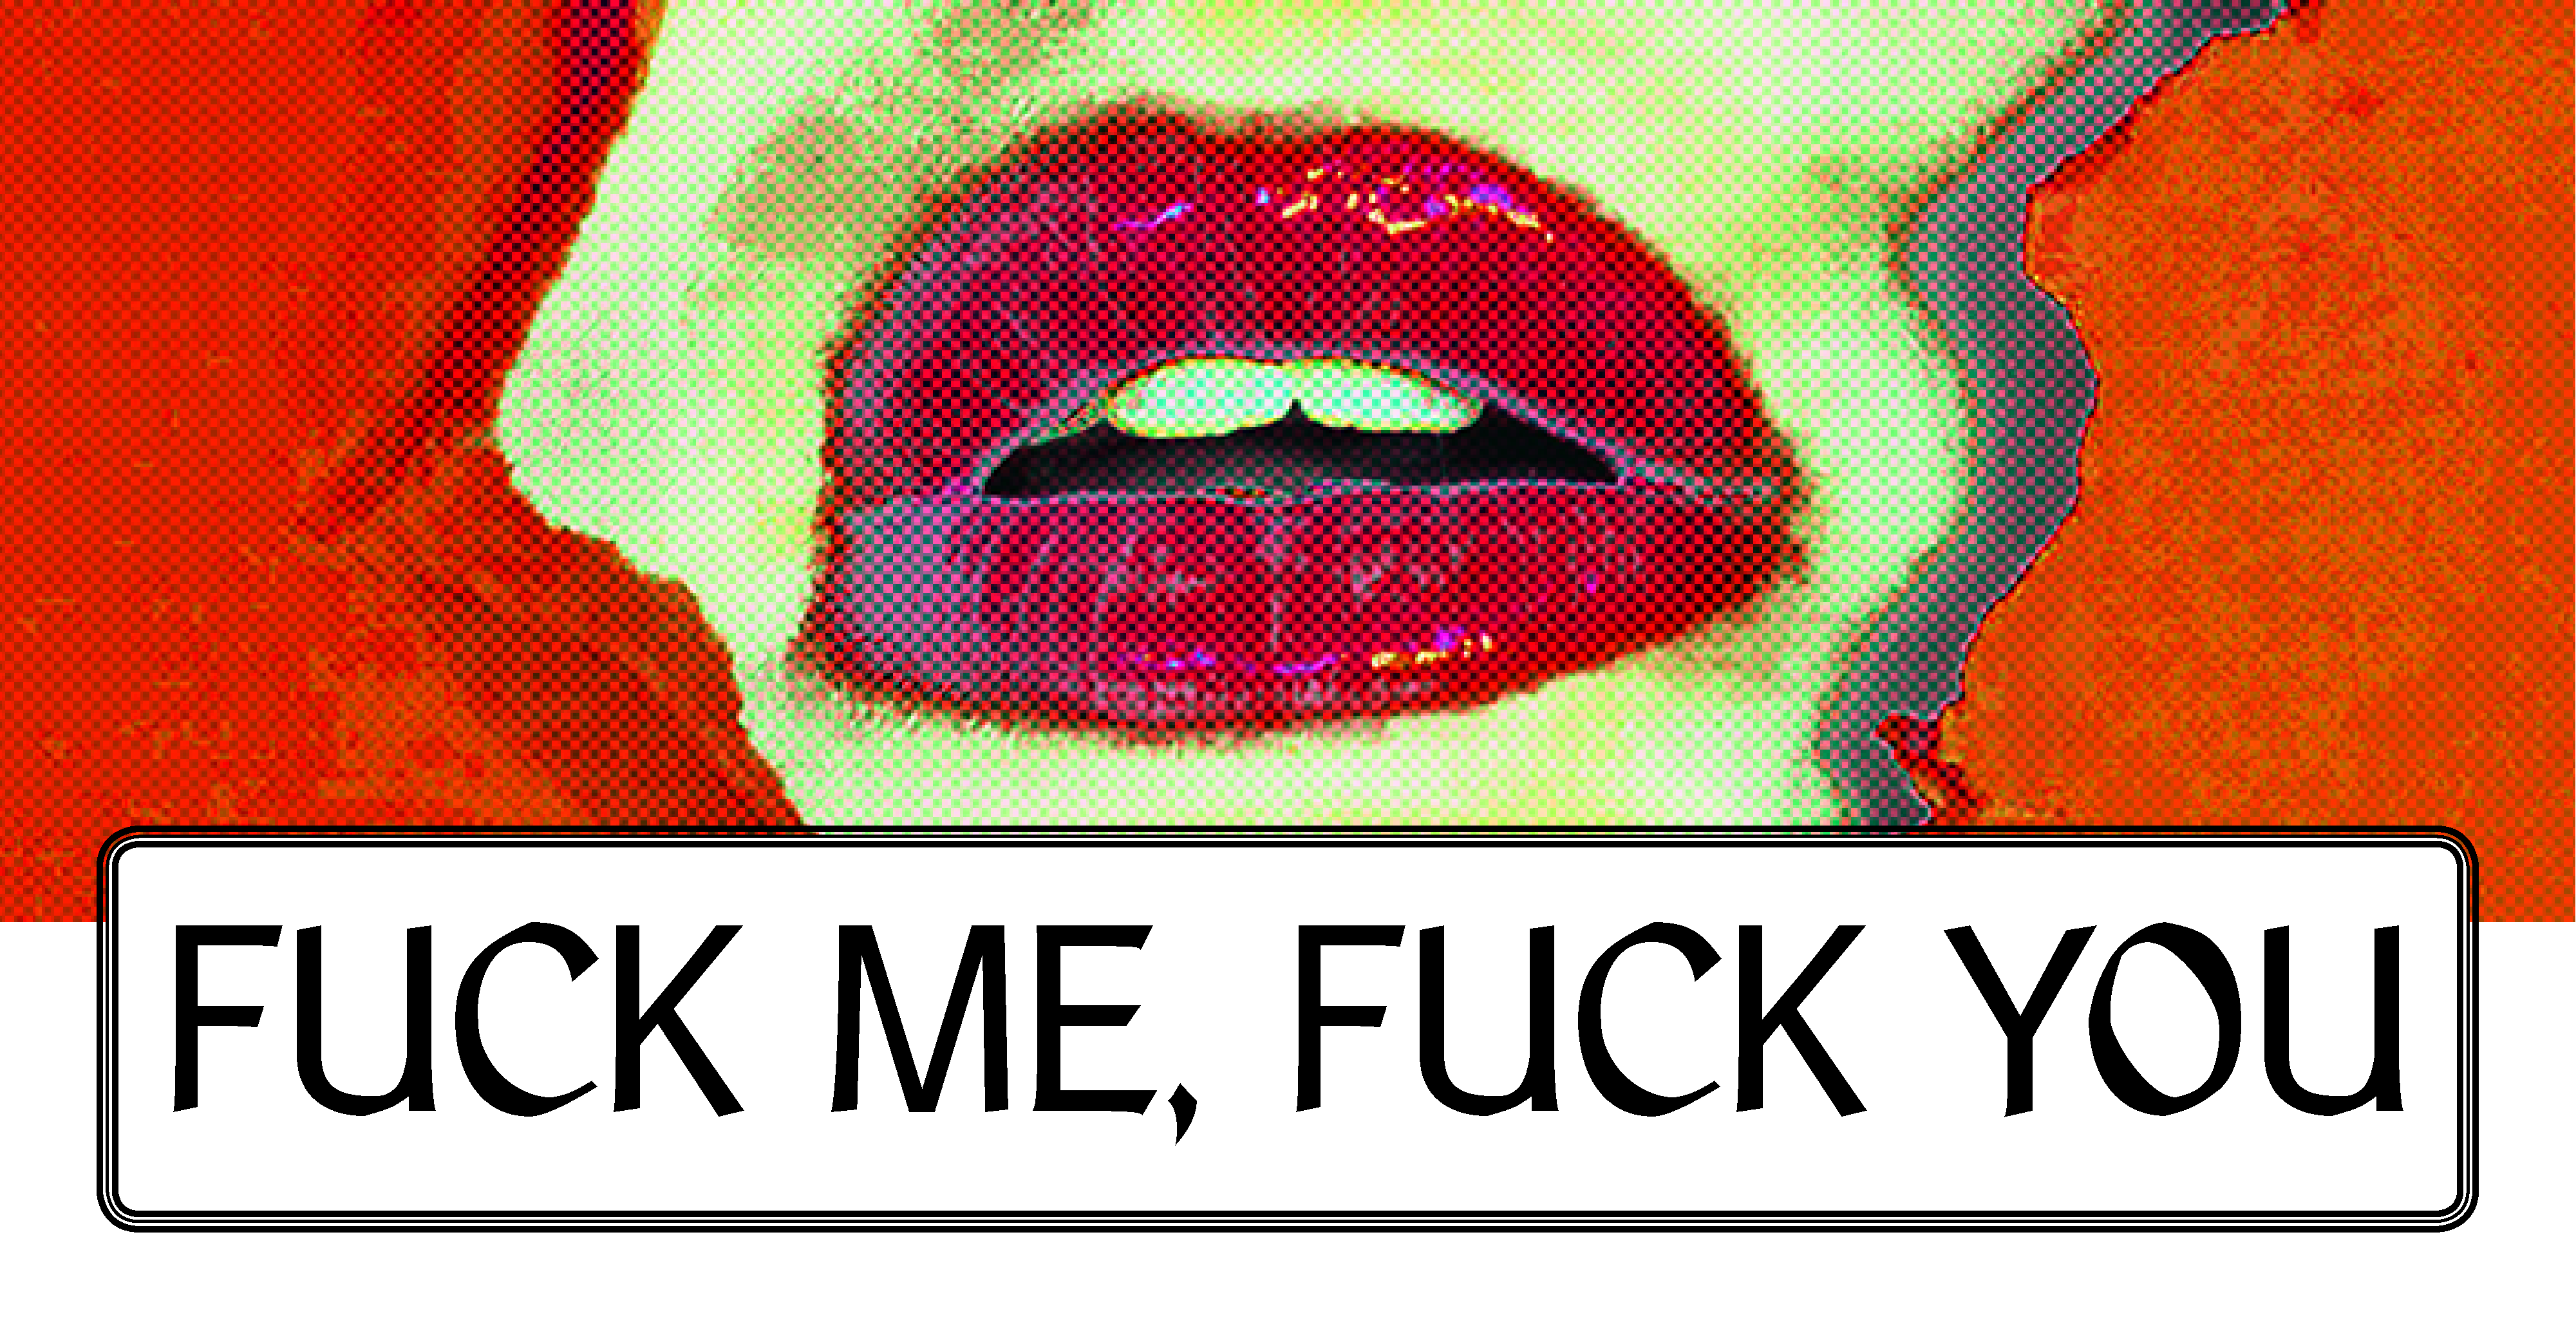 charmaine khoo recommends fuck me? fuck you pic